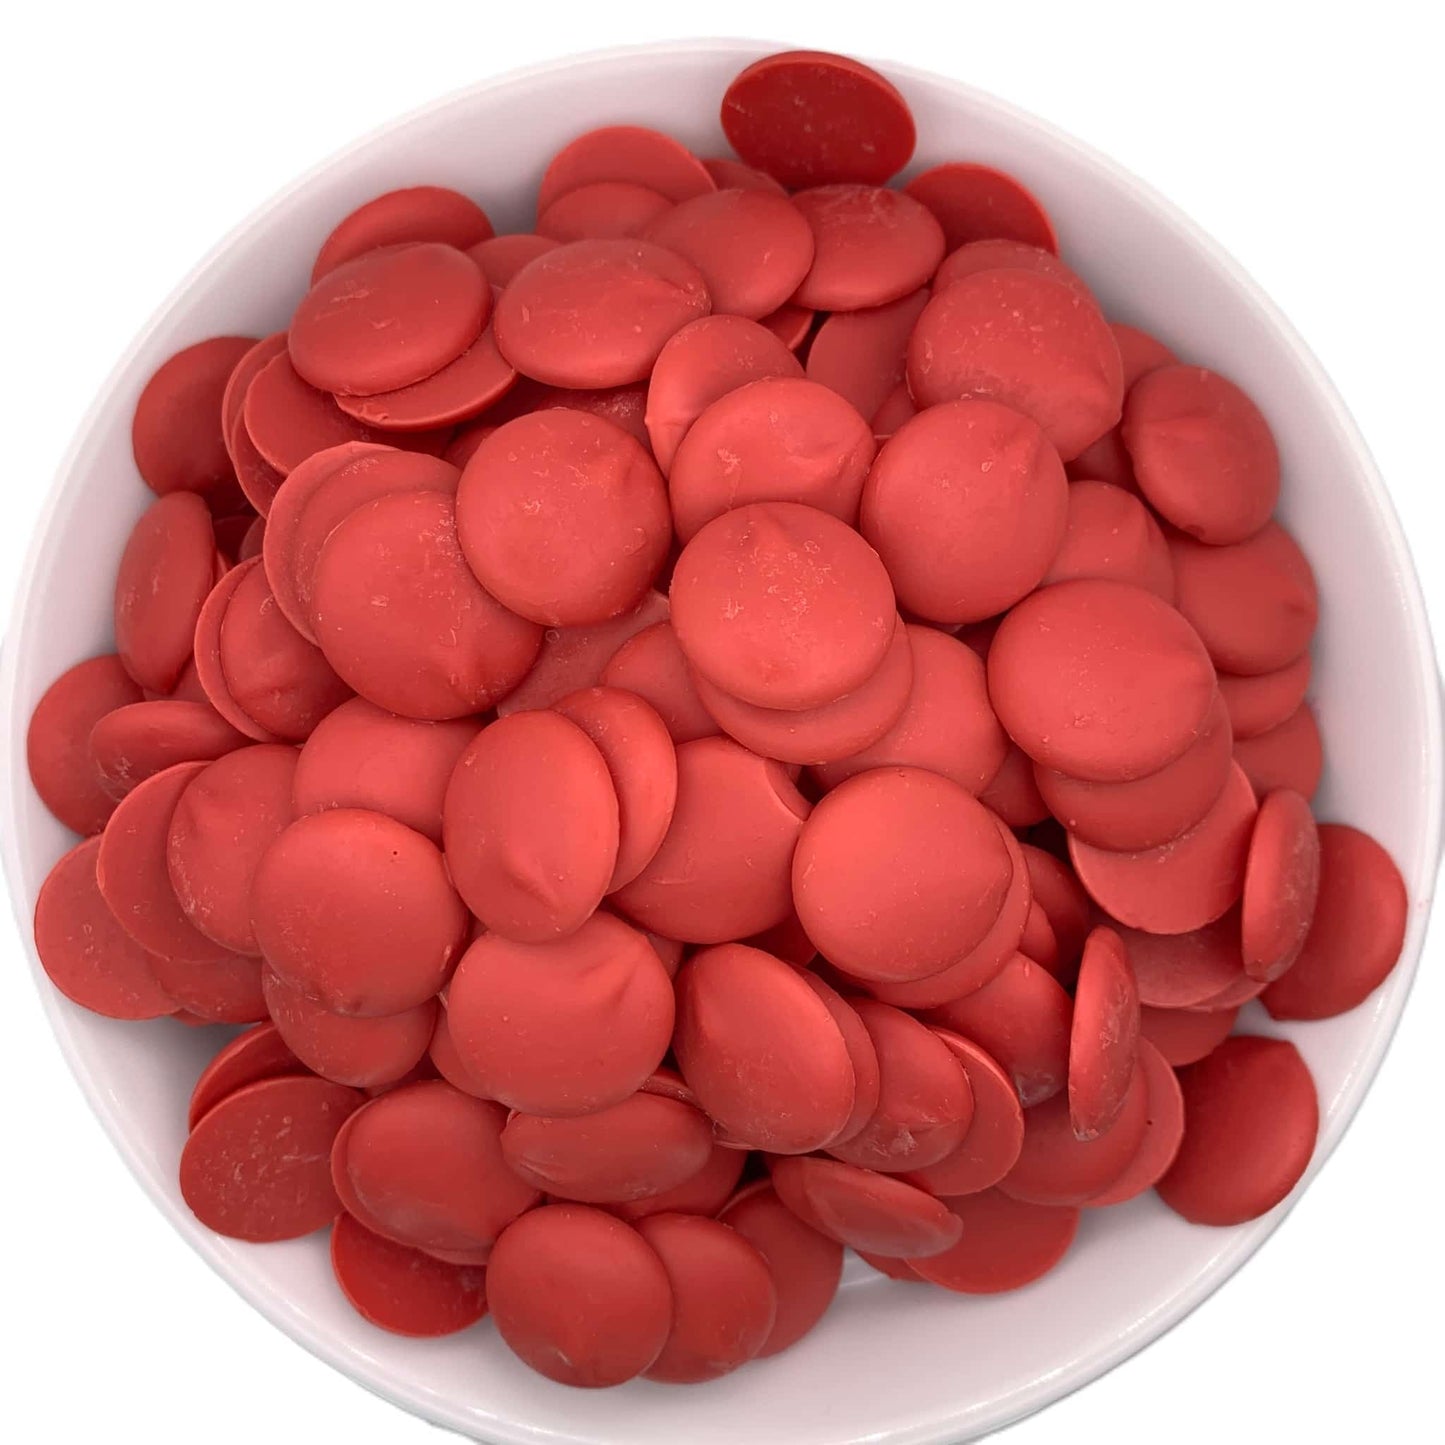 Top view of Merckens red chocolate melting wafers, displaying vibrant red discs that offer a pop of color and sweet flavor to any chocolate craft.